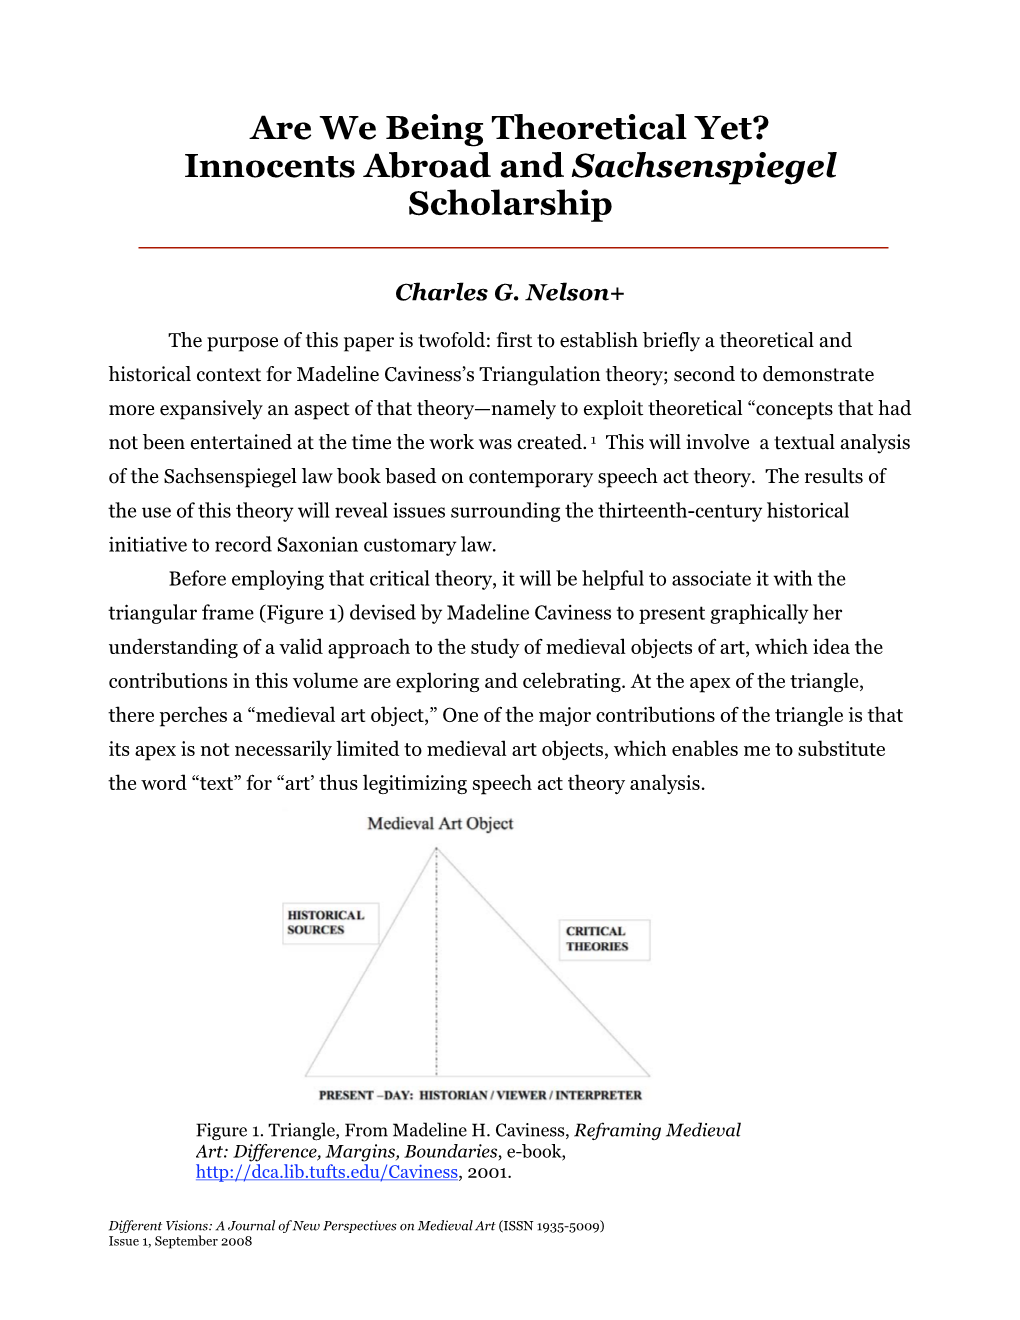 Innocents Abroad and Sachsenspiegel Scholarship